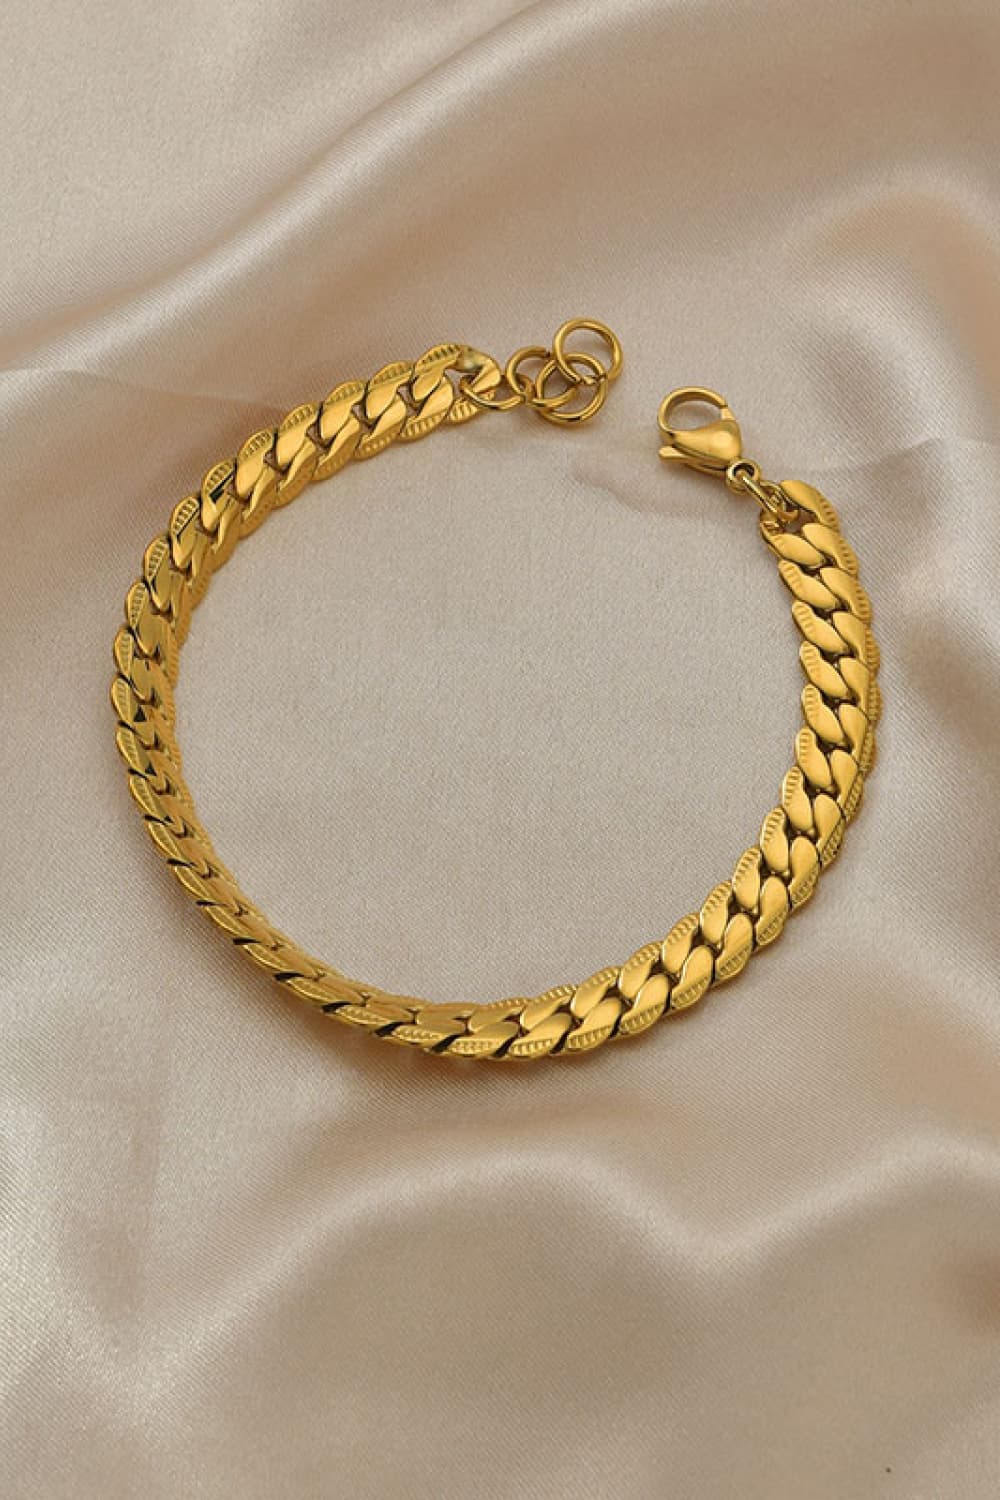 Stainless Steel Curb Chain Bracelet - Gold / One Size - T-Shirts - Bracelets - 1 - 2024